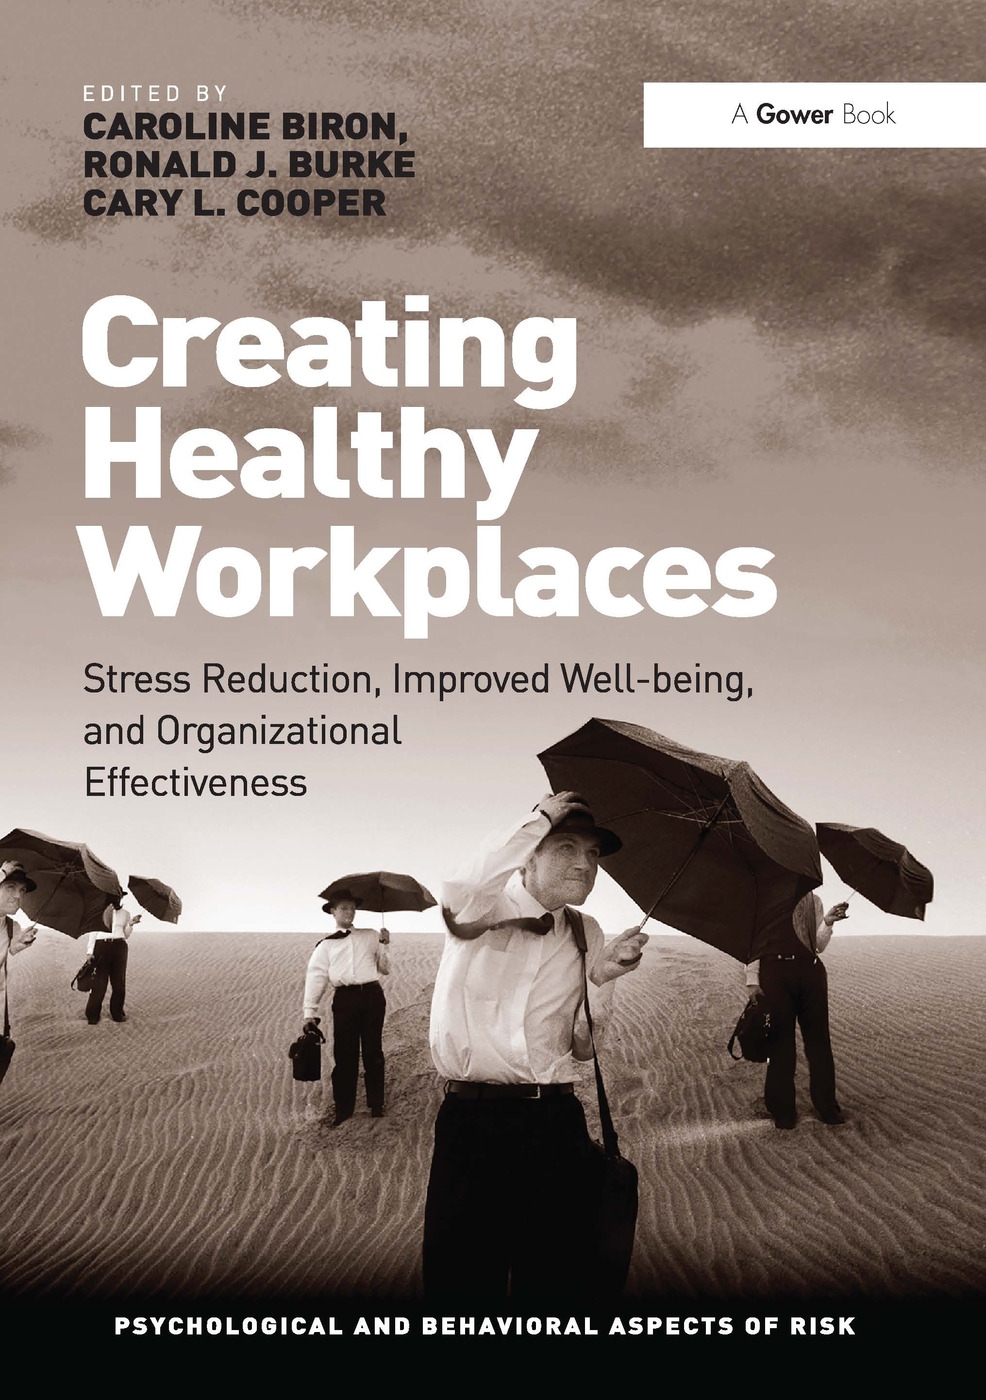 Creating Healthy Workplaces: Stress Reduction, Improved Well-Being, and Organizational Effectiveness